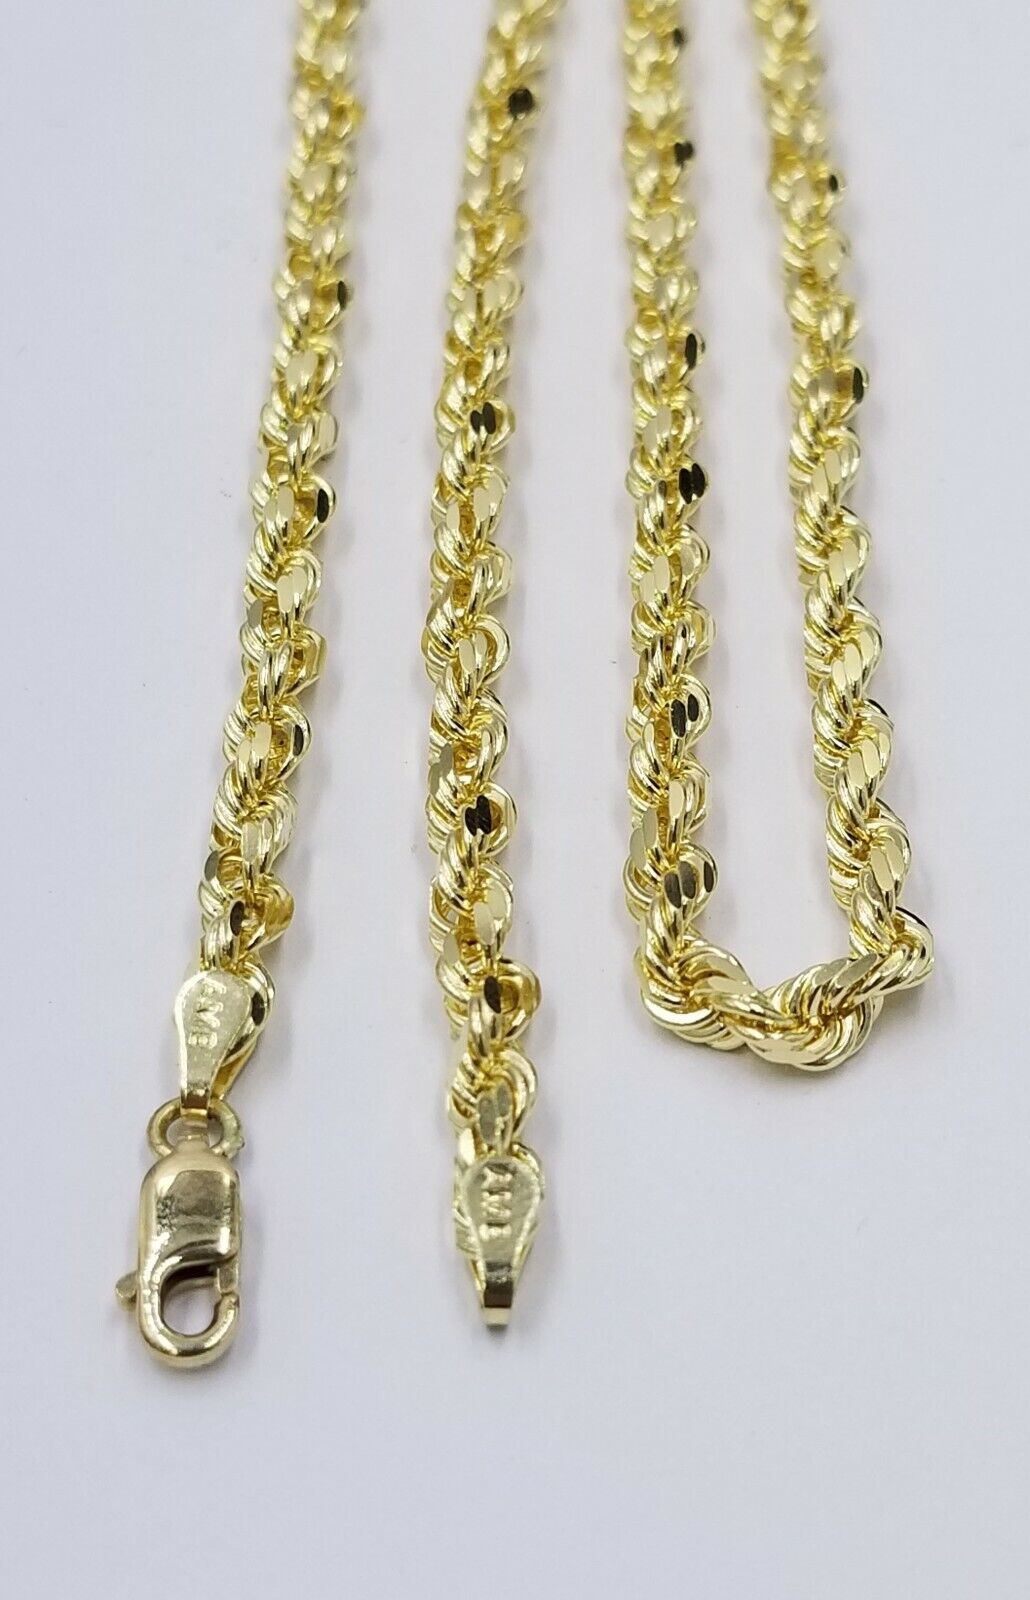 10k Real Gold Rope Chain For Men SOLID 5mm 24 Inch Diamond Cut On Sale